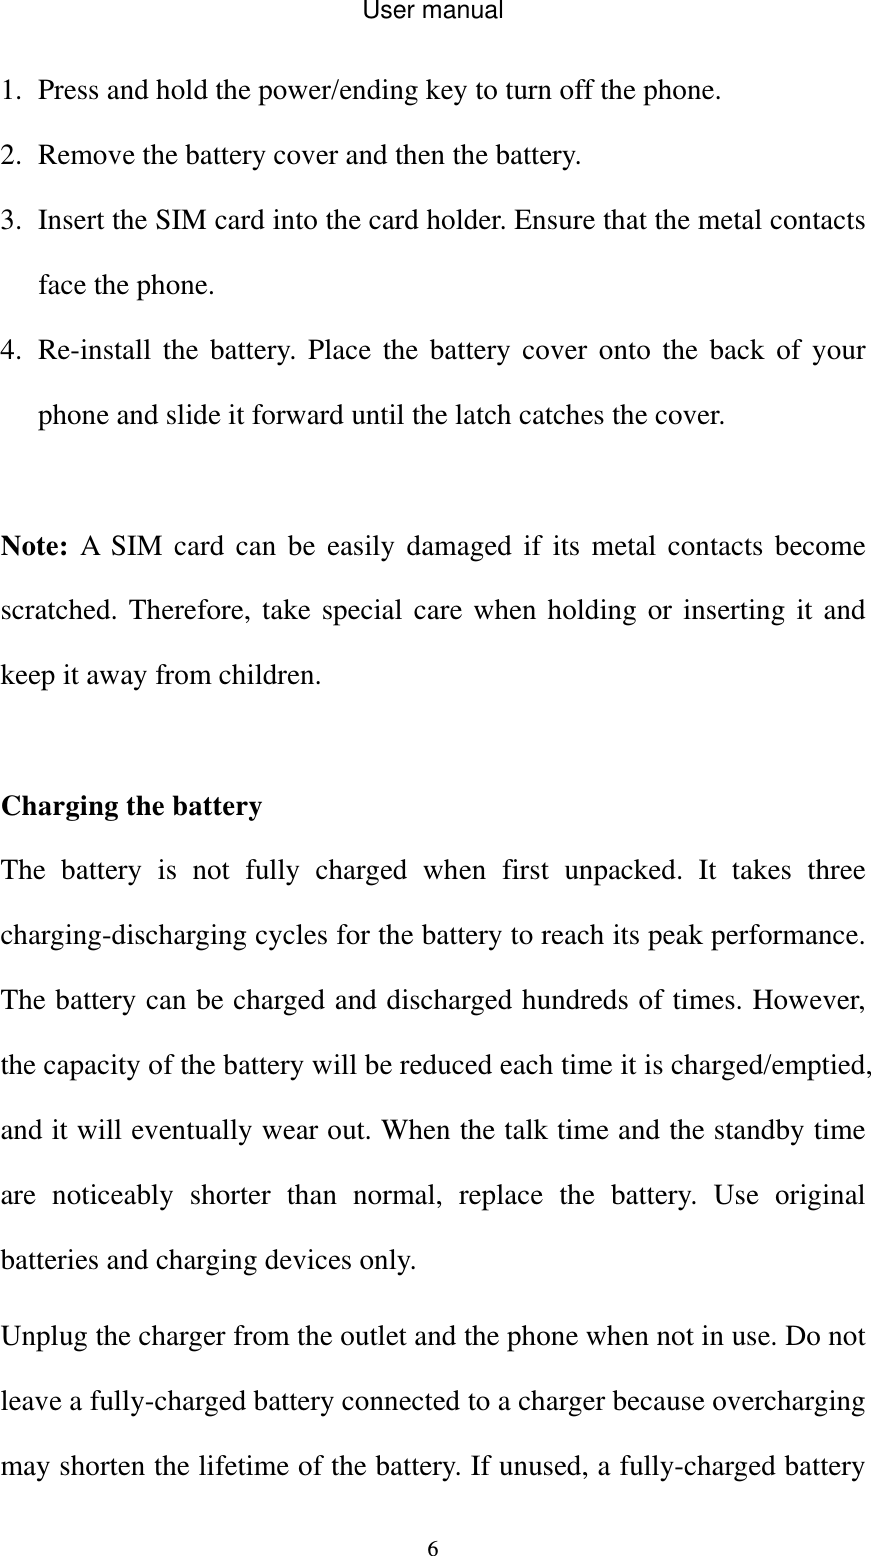 User manual  61. Press and hold the power/ending key to turn off the phone. 2. Remove the battery cover and then the battery. 3. Insert the SIM card into the card holder. Ensure that the metal contacts face the phone. 4. Re-install the battery. Place the battery cover onto the back of your phone and slide it forward until the latch catches the cover.  Note: A SIM card can be easily damaged if its metal contacts become scratched. Therefore, take special care when holding or inserting it and keep it away from children.    Charging the battery The battery is not fully charged when first unpacked. It takes three charging-discharging cycles for the battery to reach its peak performance. The battery can be charged and discharged hundreds of times. However, the capacity of the battery will be reduced each time it is charged/emptied, and it will eventually wear out. When the talk time and the standby time are noticeably shorter than normal, replace the battery. Use original batteries and charging devices only. Unplug the charger from the outlet and the phone when not in use. Do not leave a fully-charged battery connected to a charger because overcharging may shorten the lifetime of the battery. If unused, a fully-charged battery 